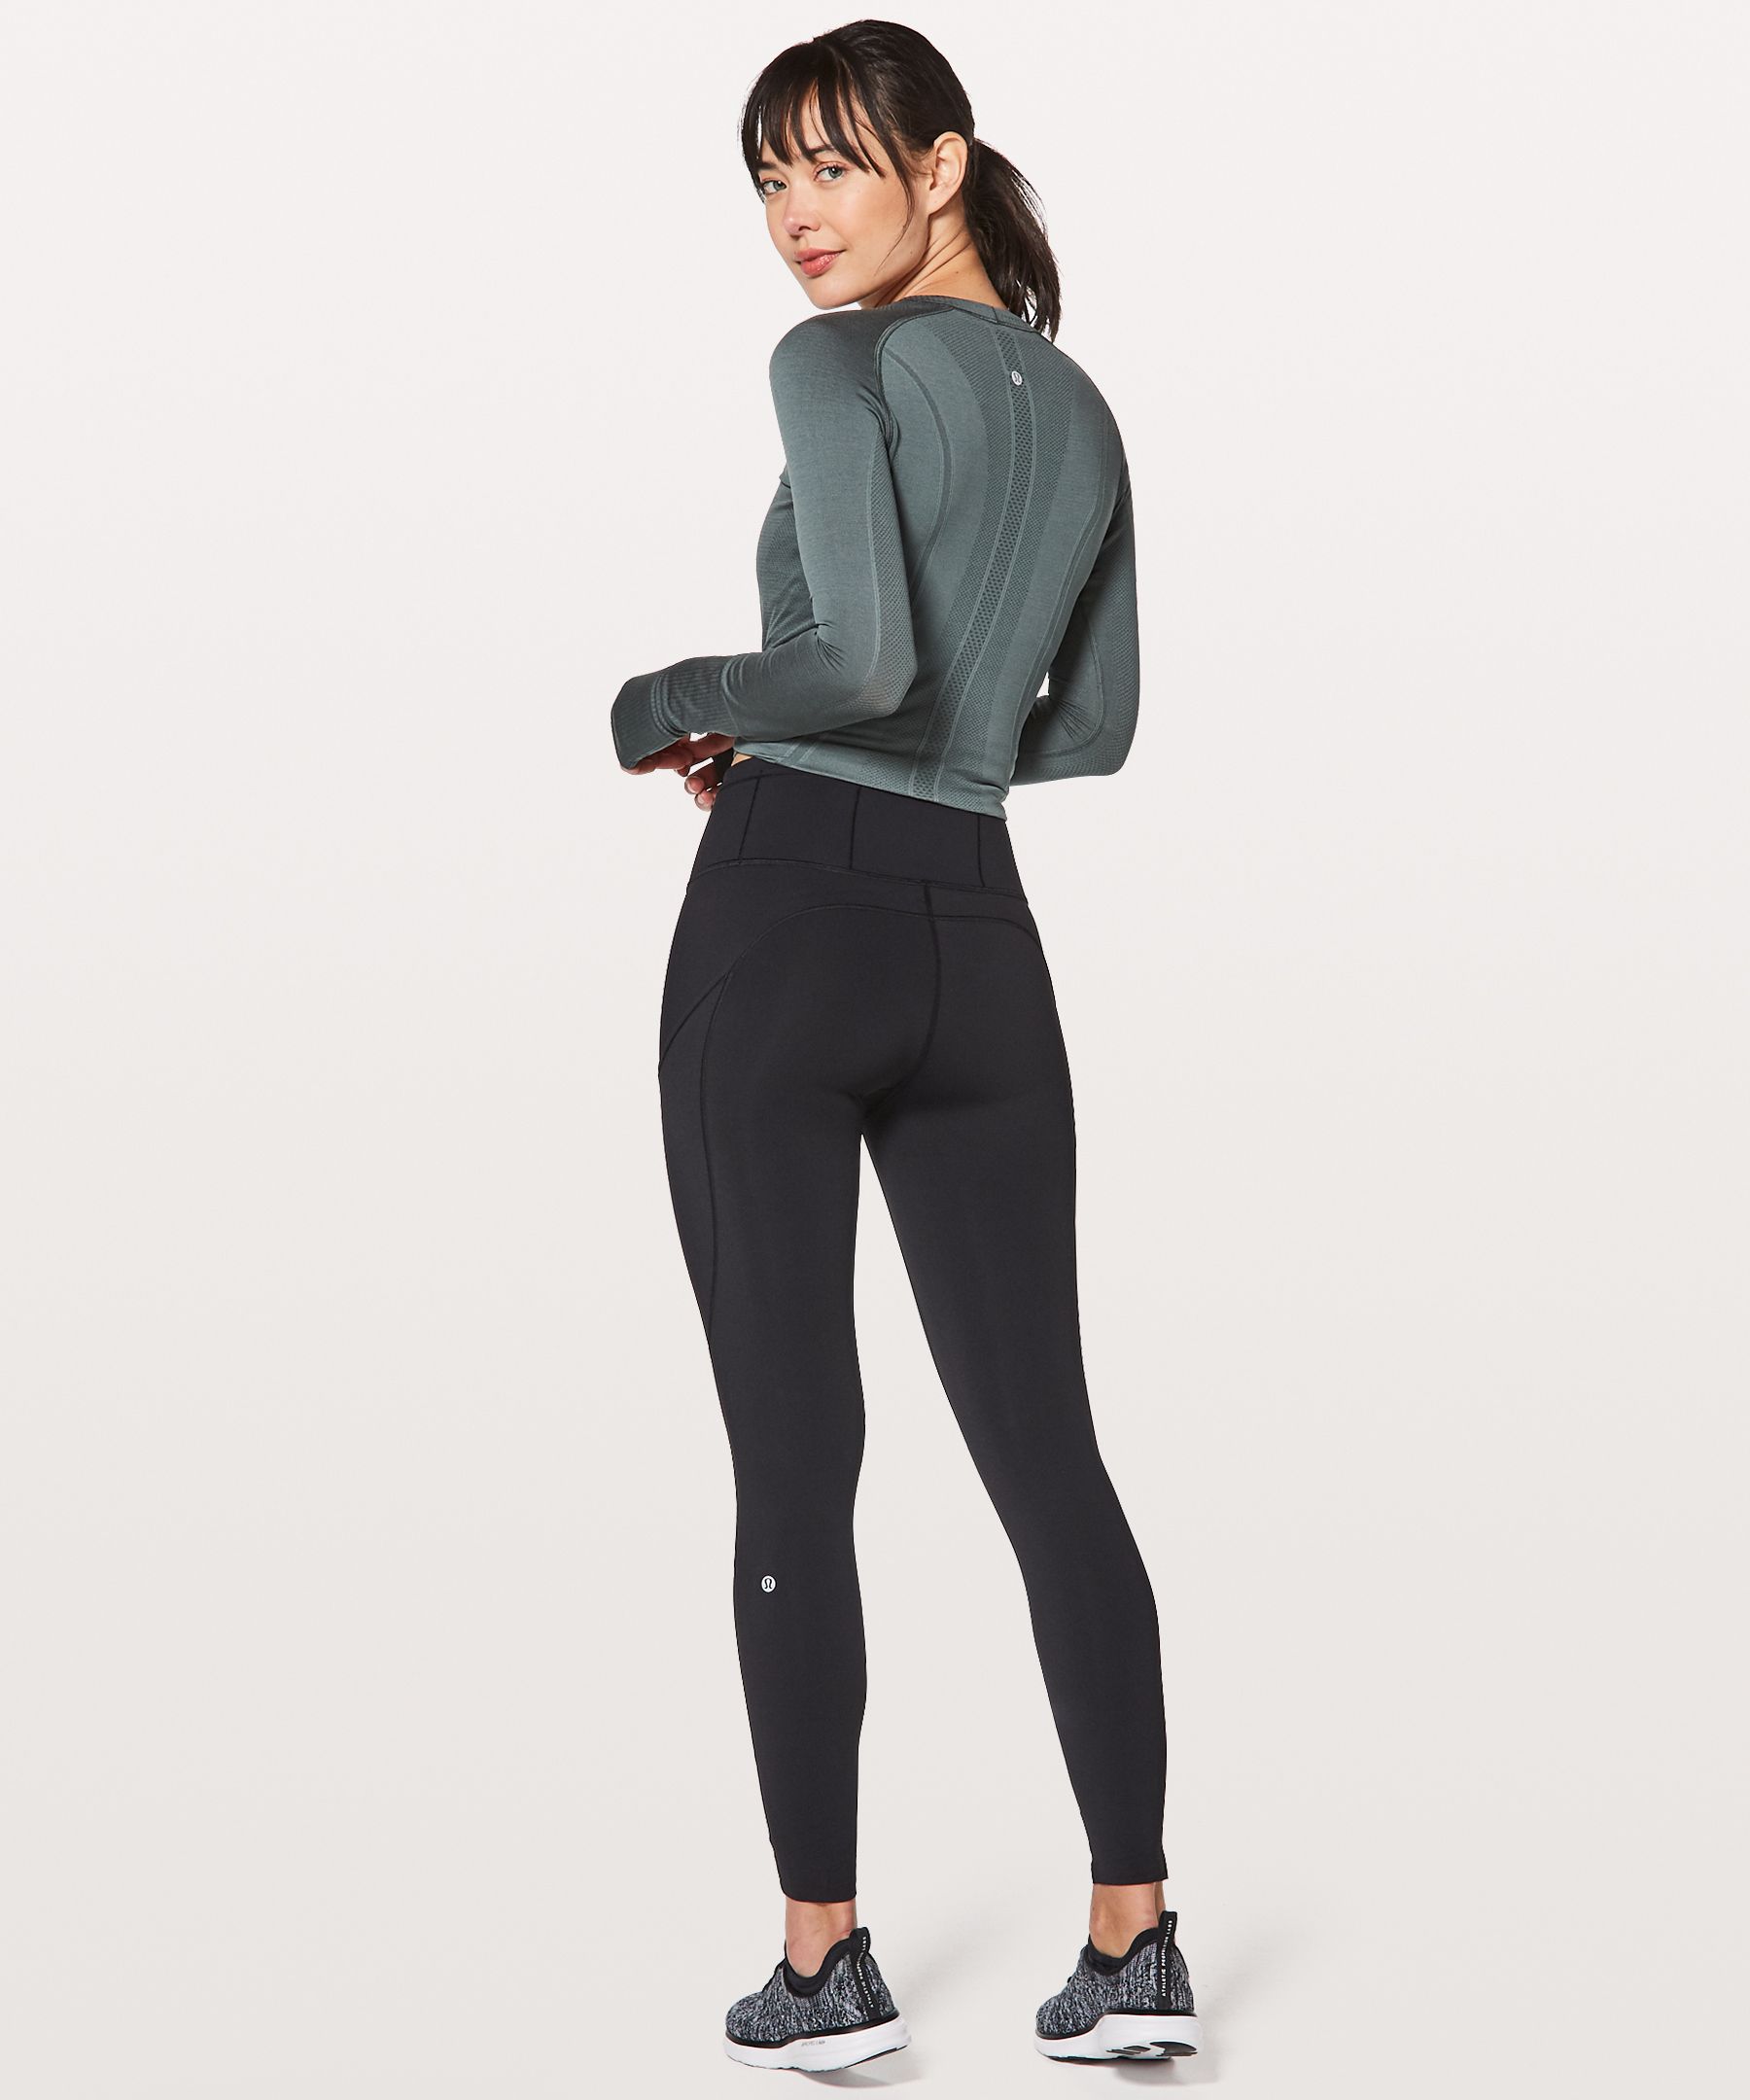 LULULEMON Fast and Free 7/8 Tight 25 (Black (Non-Reflective), 6)